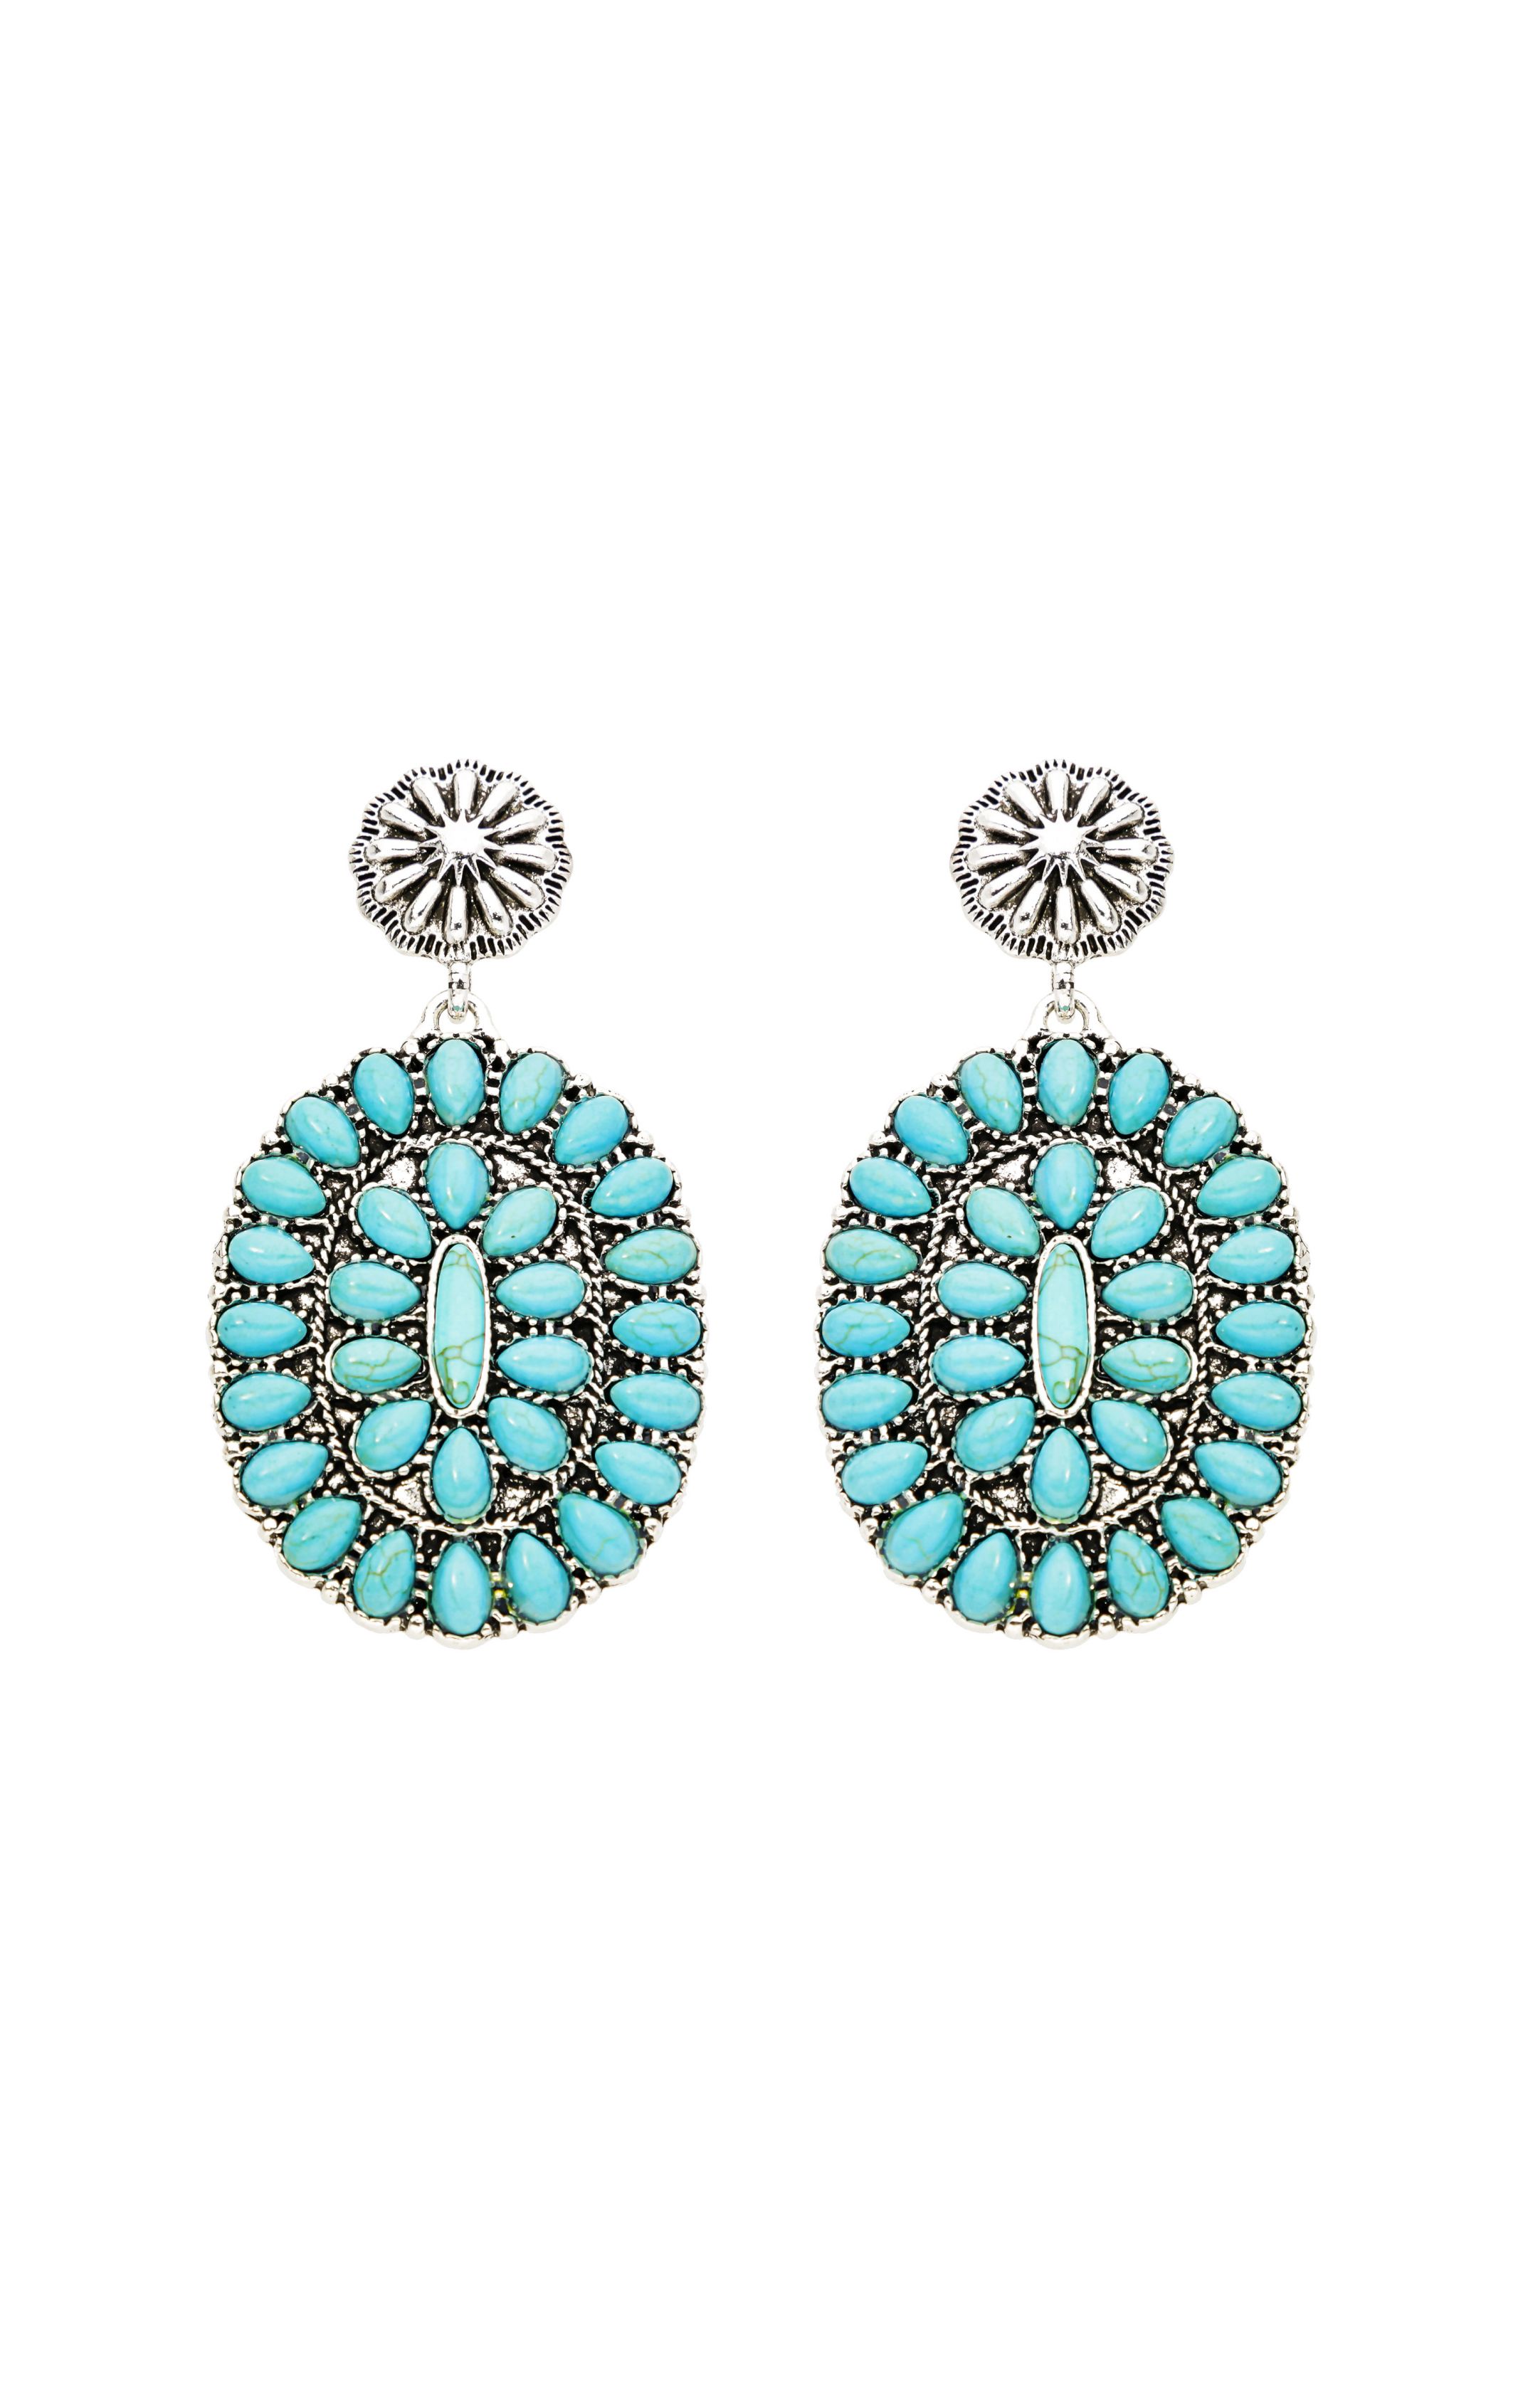 Earrings Donoma Turquoise